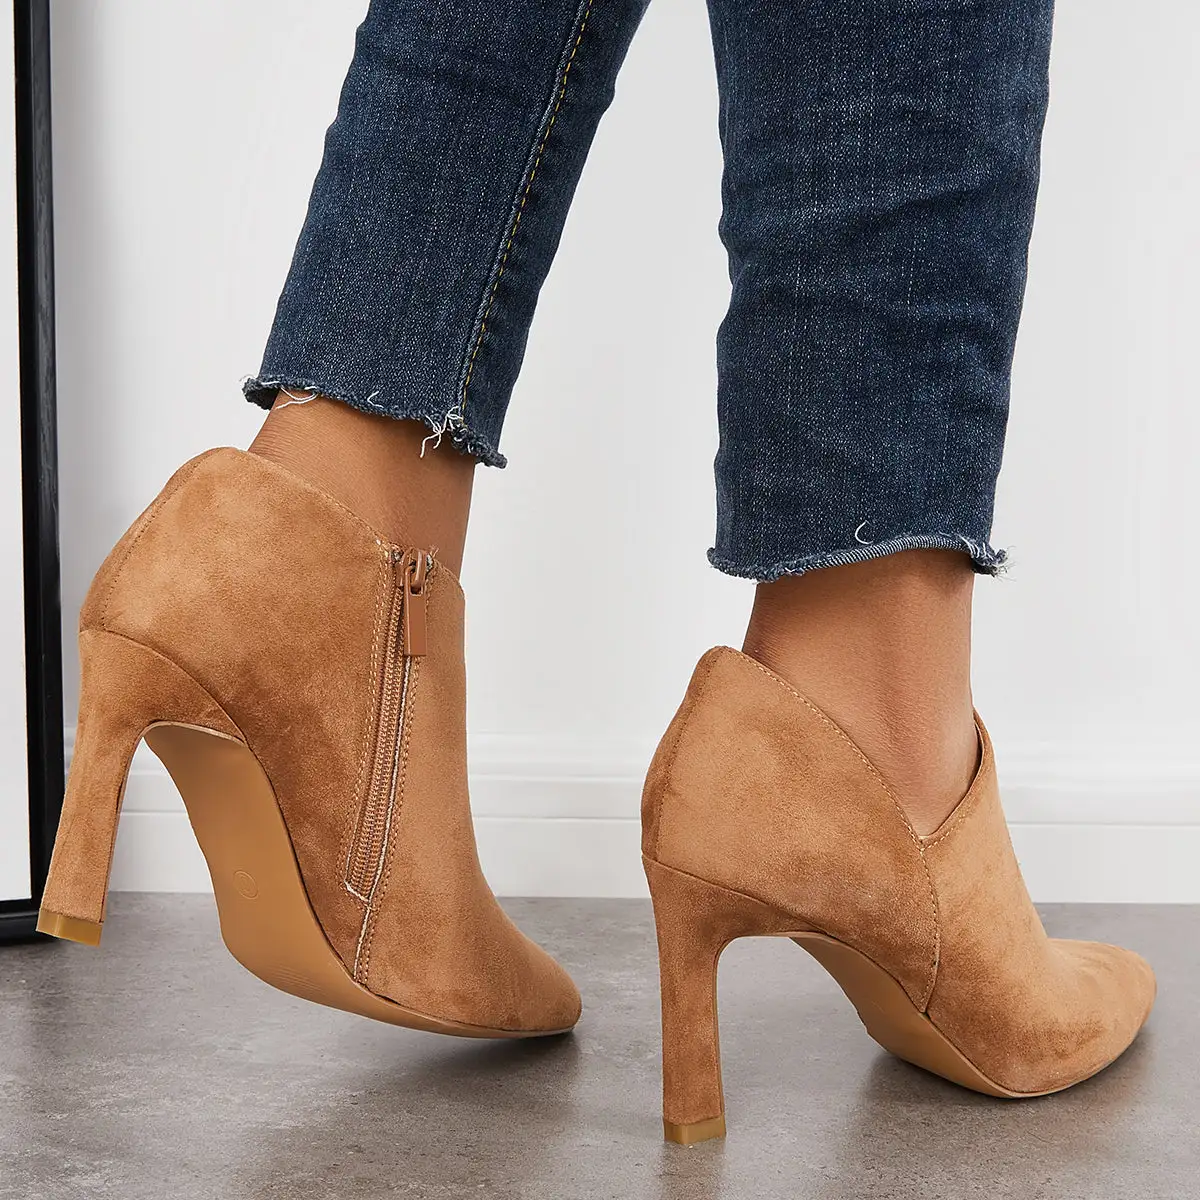 Pointed Toe V Cutout High Heel Ankle Boots Side Zip Dress Booties